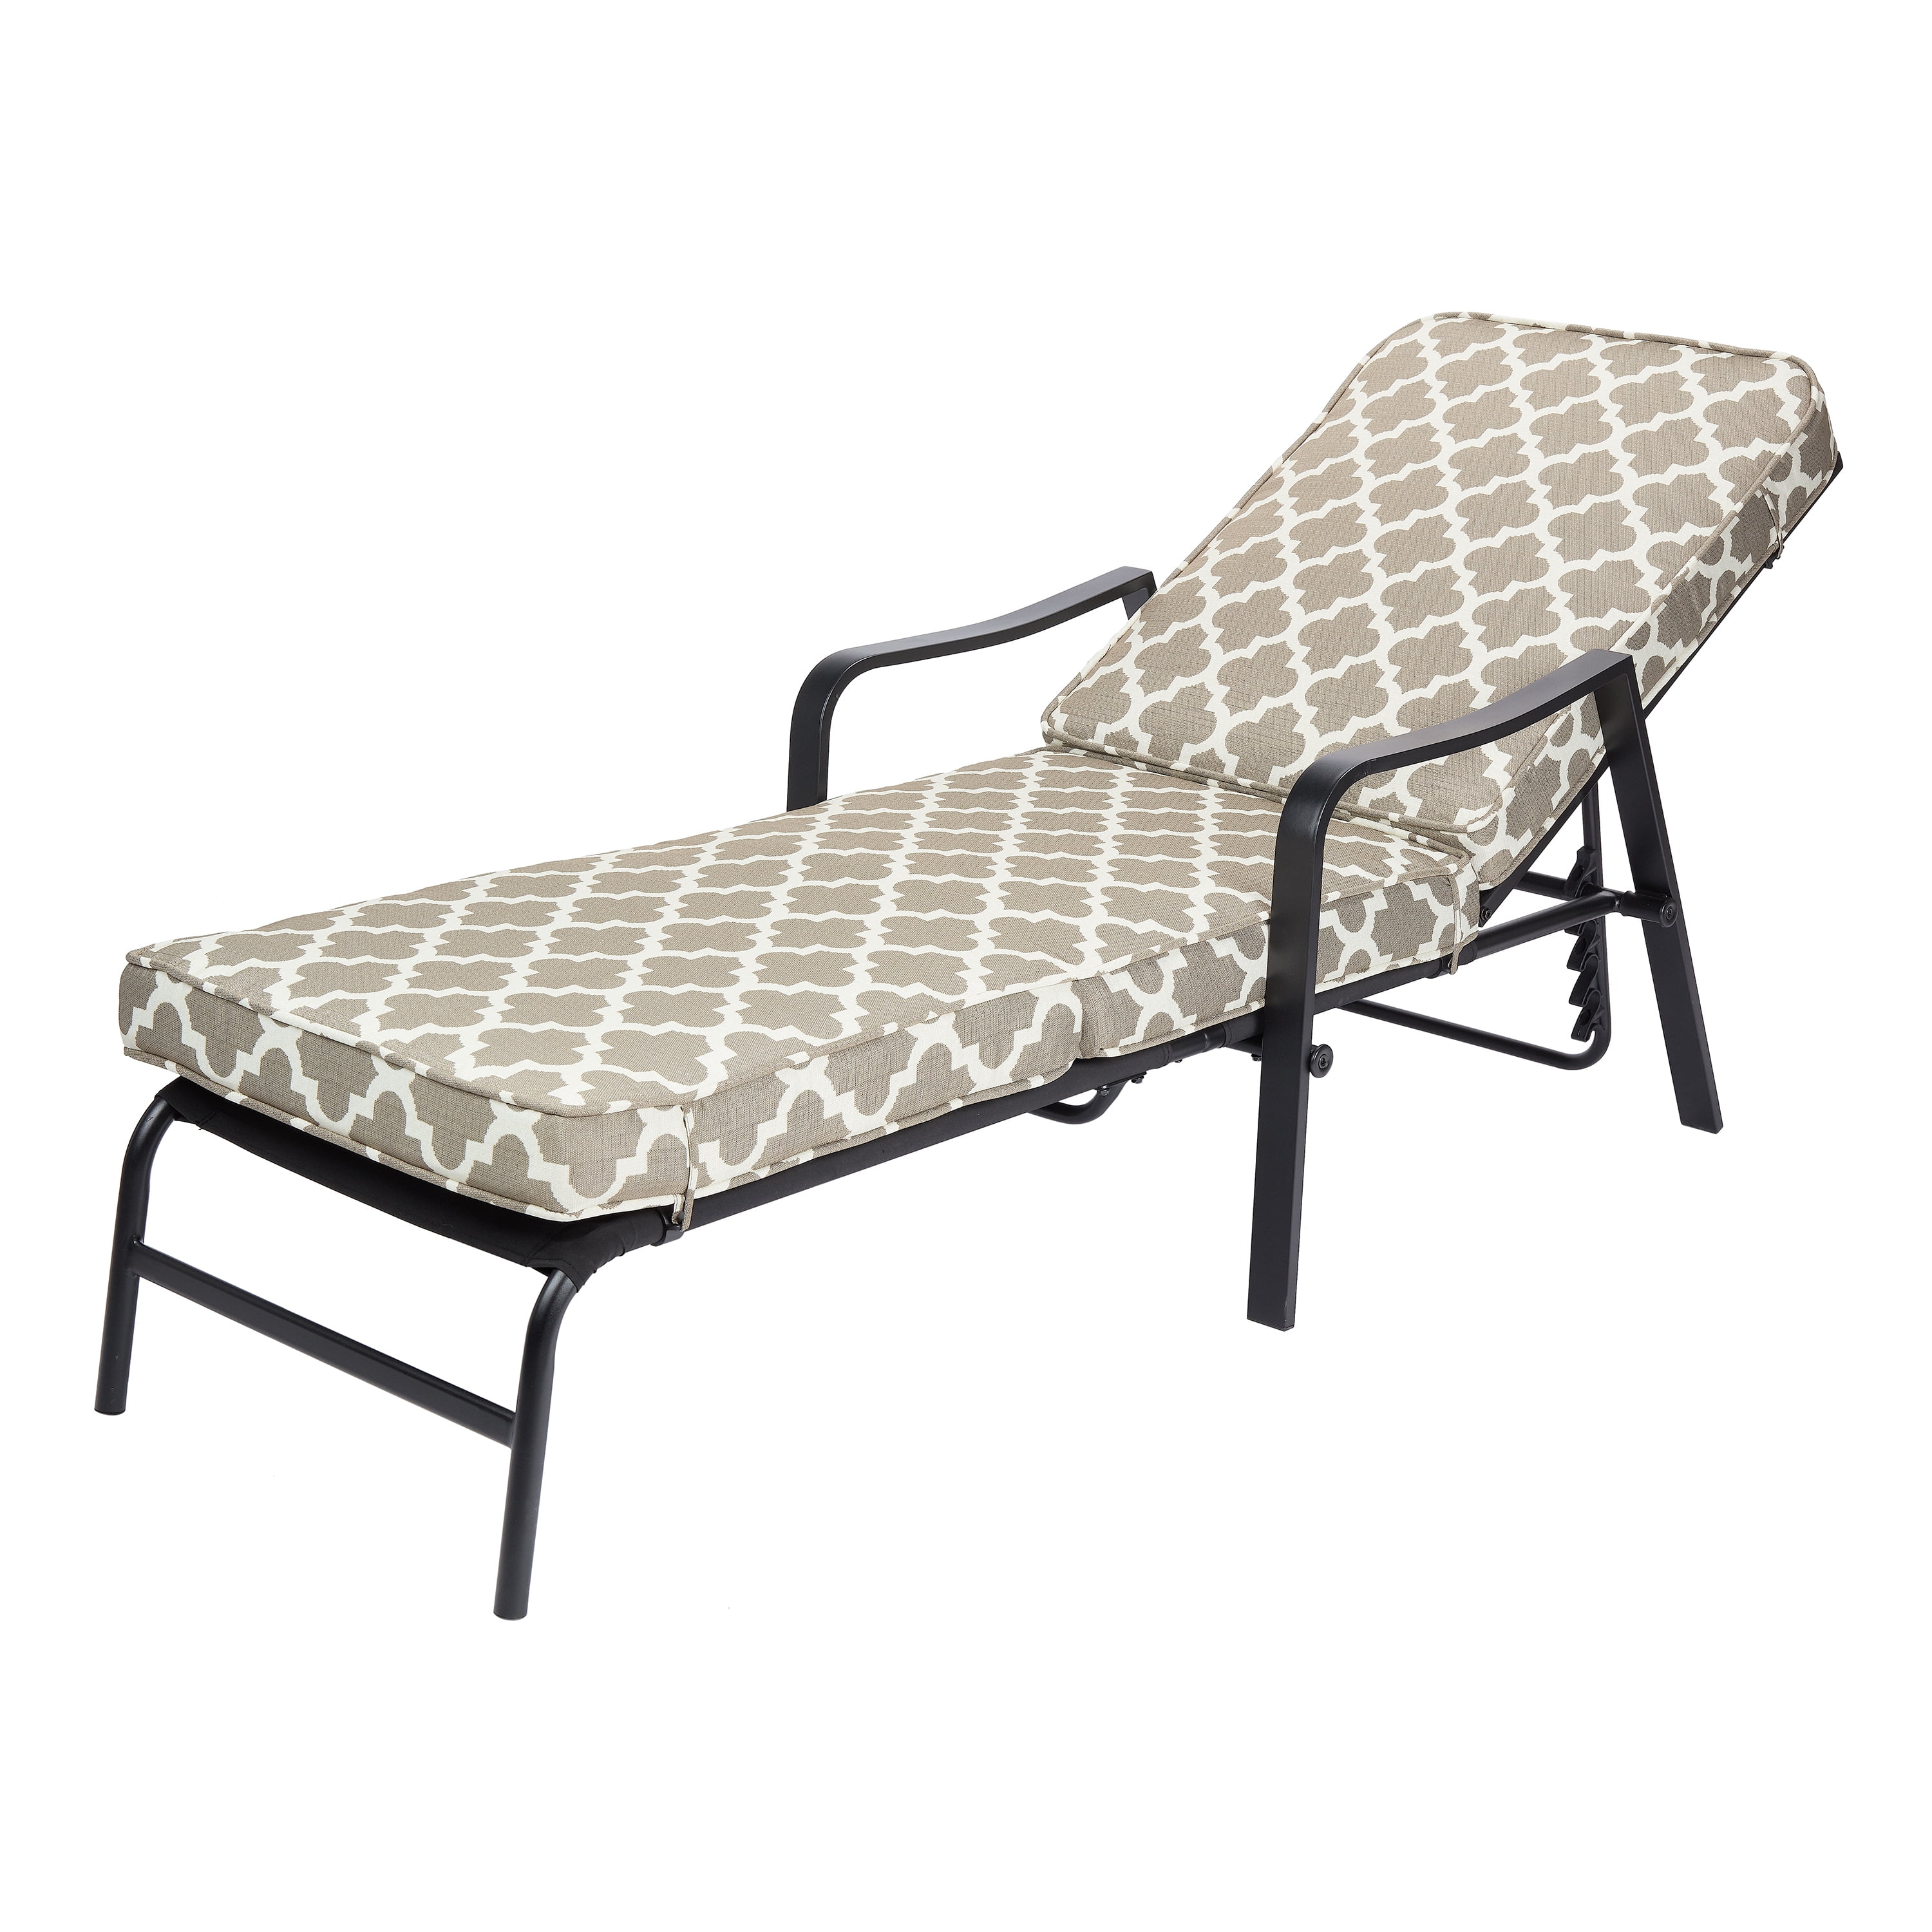 Mainstays Cabot Grove Outdoor Chaise Lounge with Gray/White Cushions ...